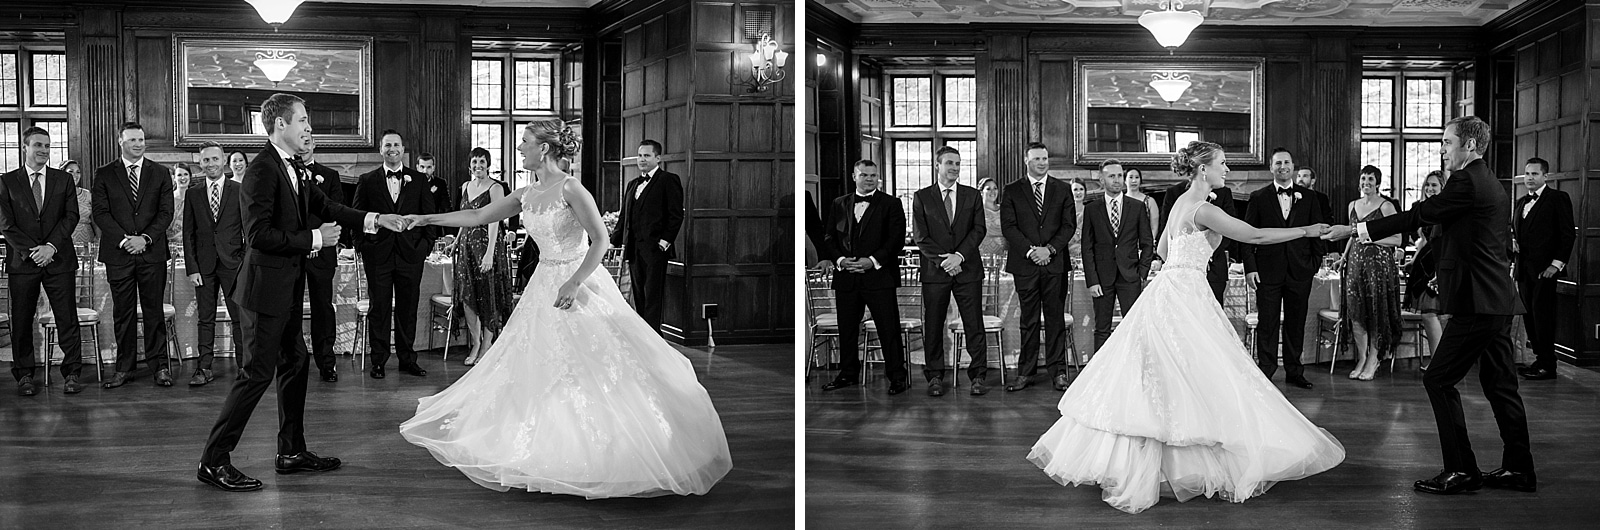 Bride and groom first dance, wedding reception, wedding party, dancing, black and white wedding photo